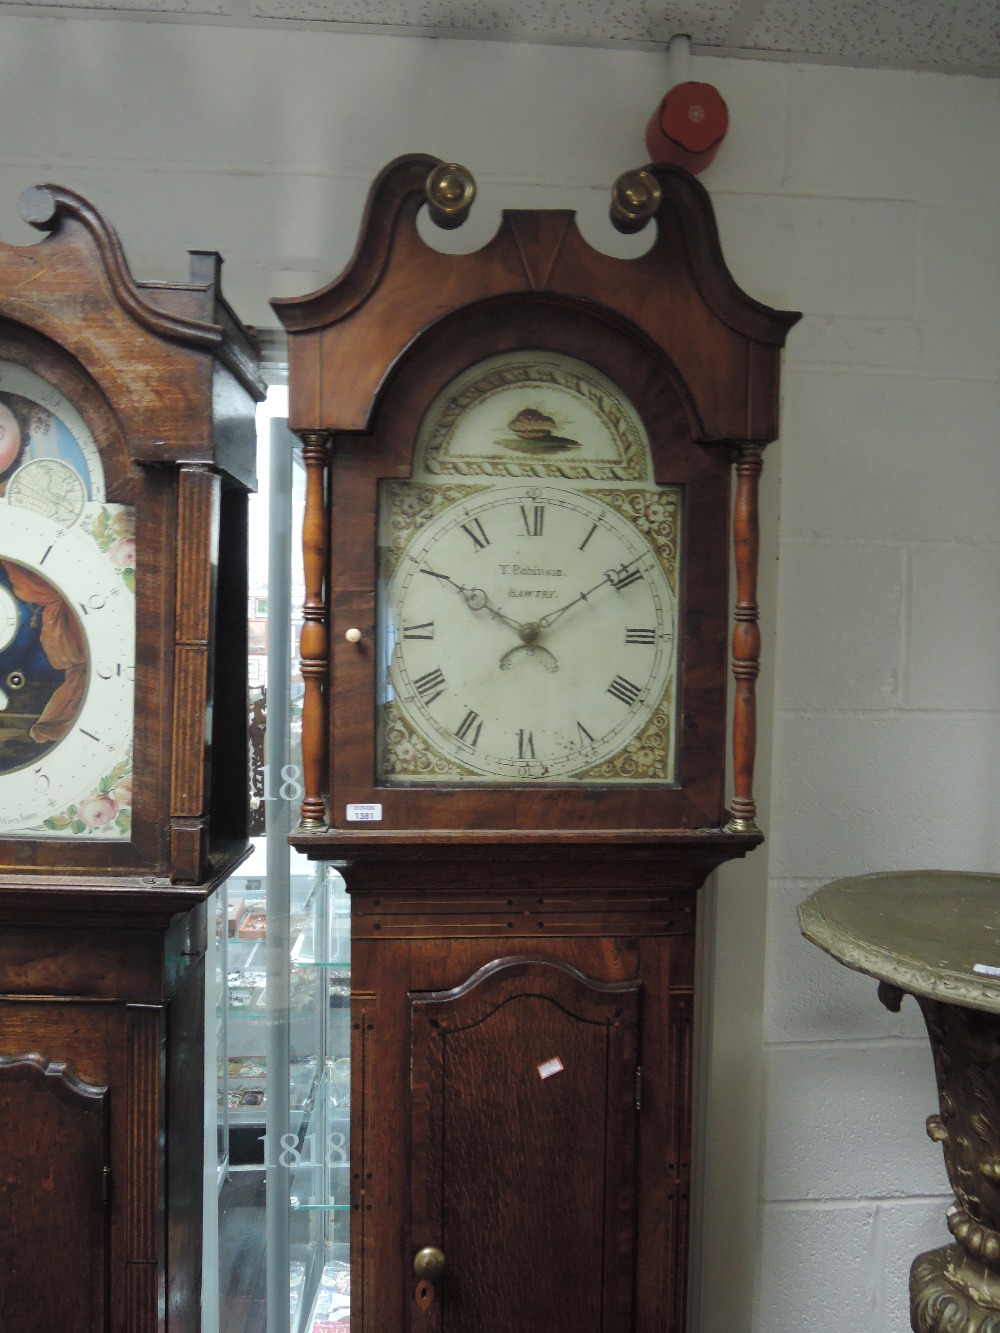 An early 19th century oak longcase clock having swan neck and pillar hood, containing painted dial